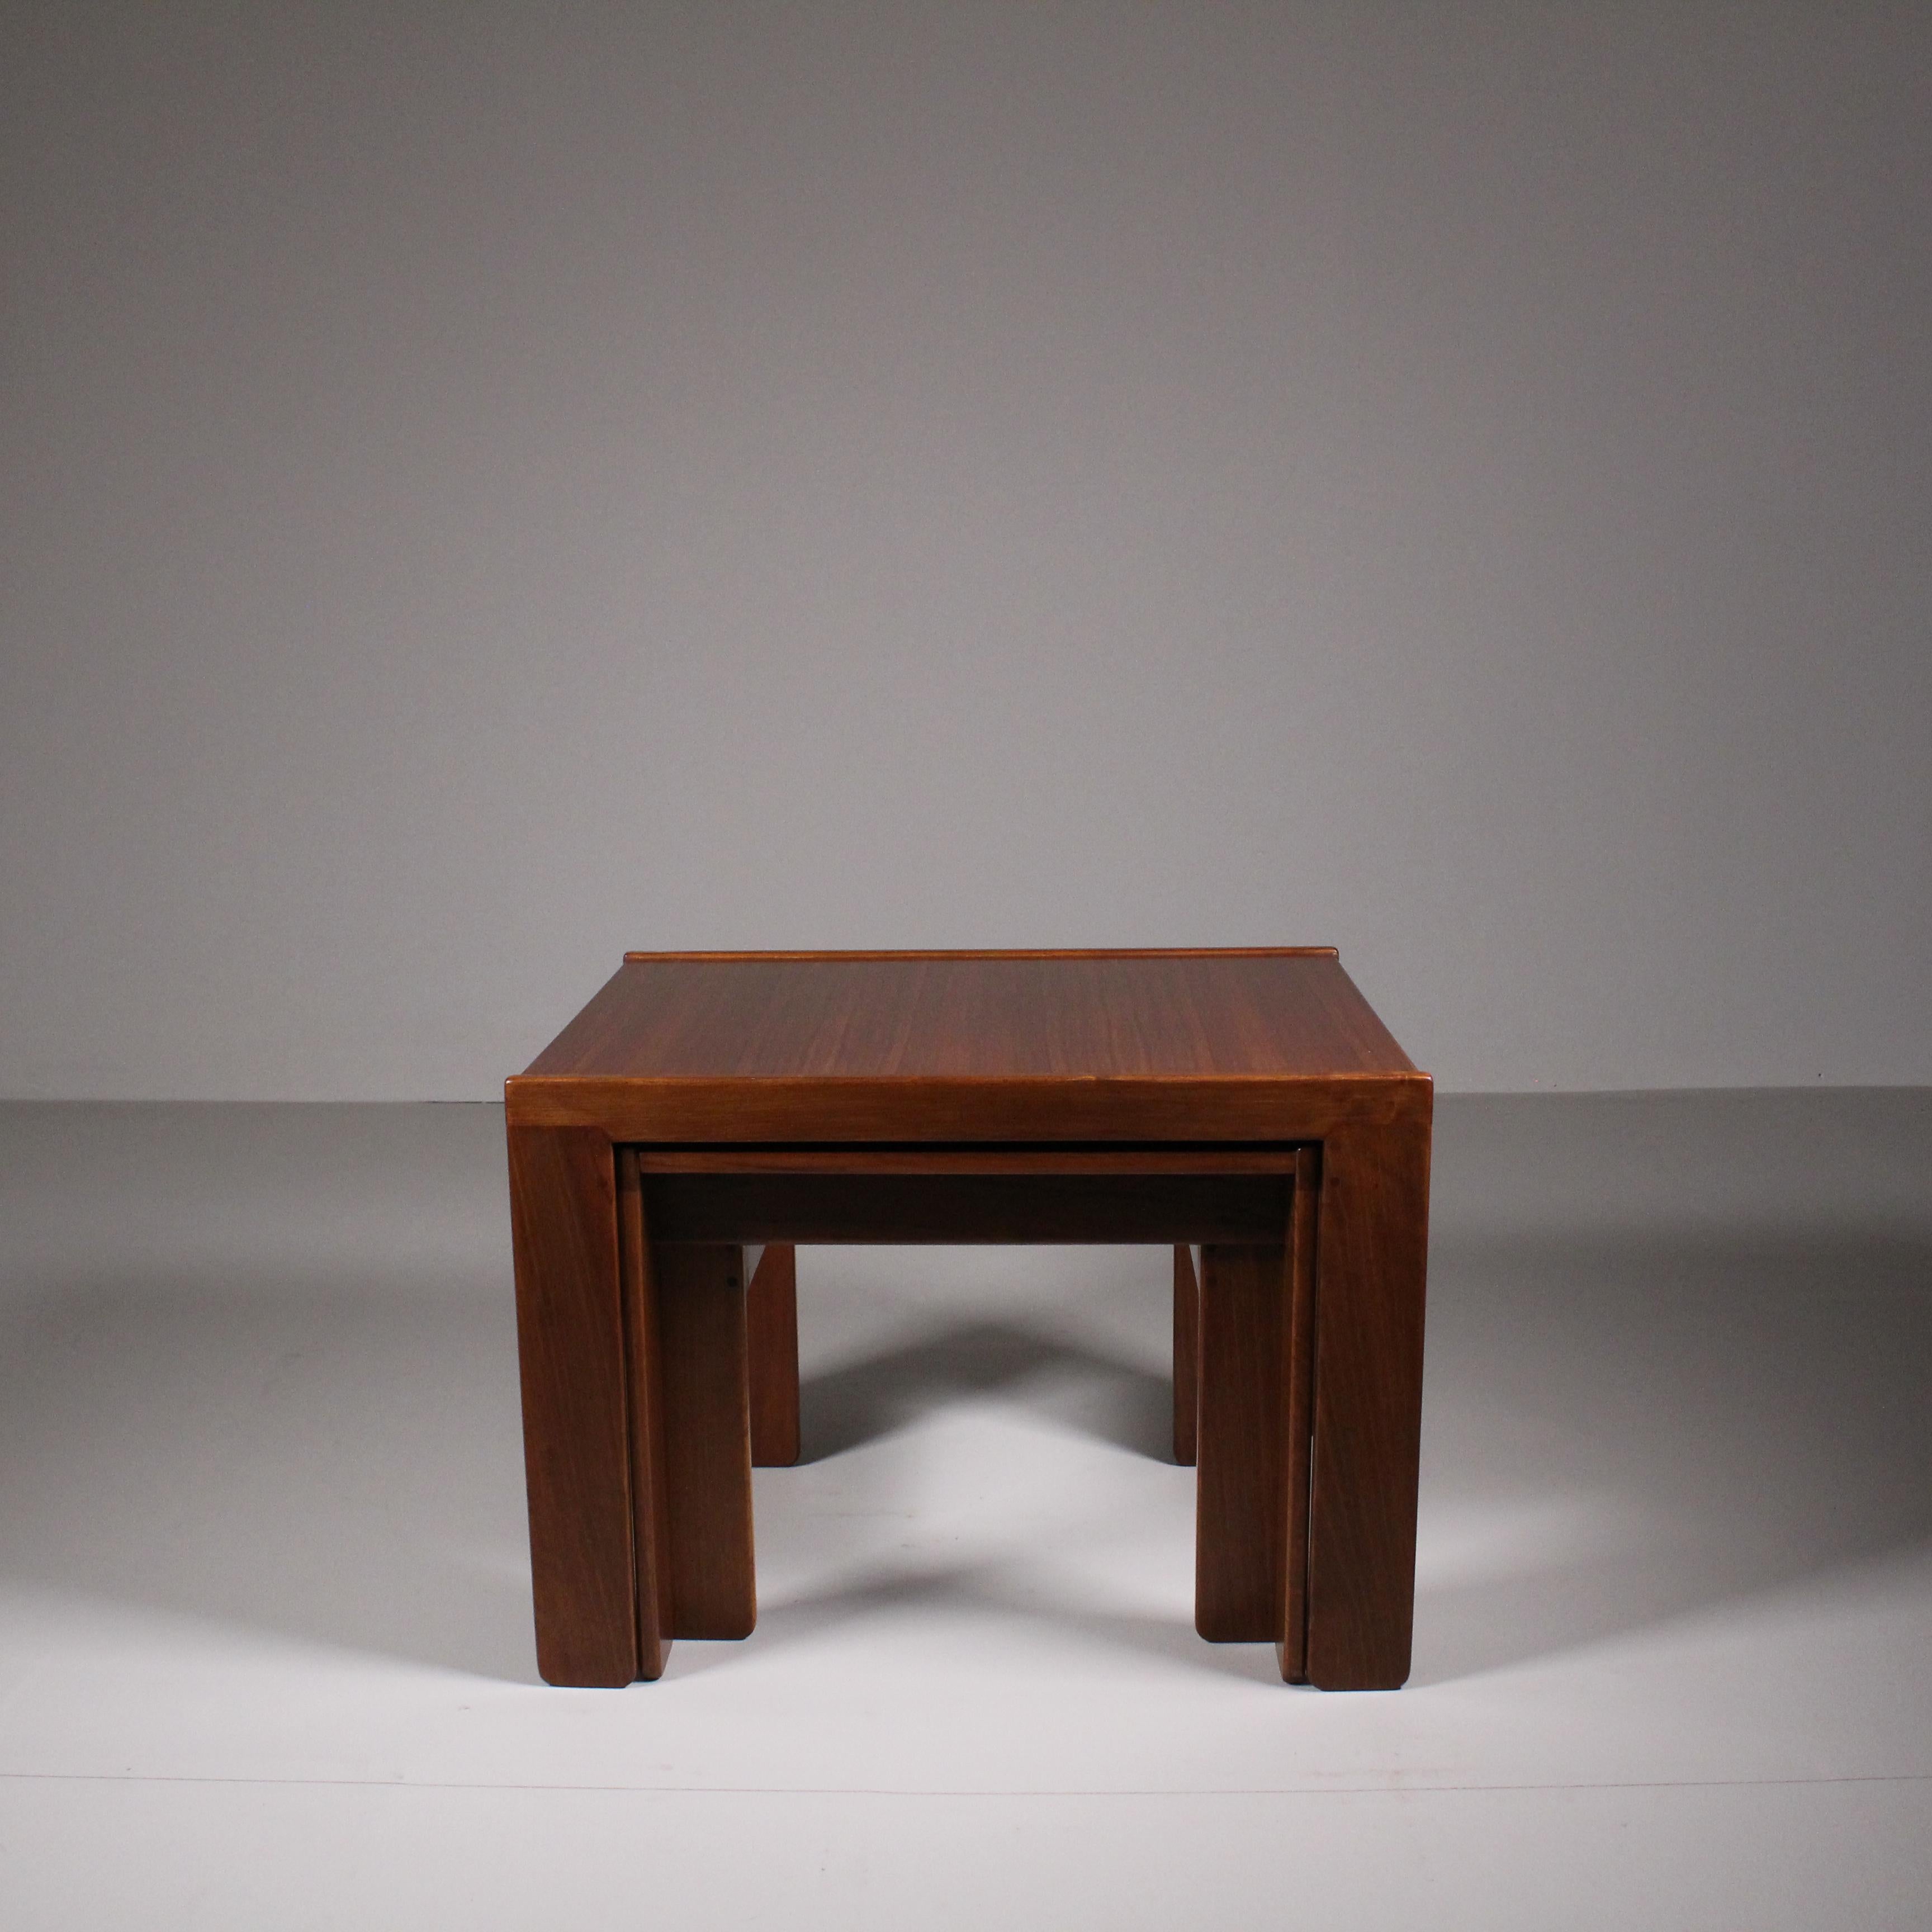 Small tables model 777, Afra and Tobia Scarpa, 1965 Circa For Sale 5